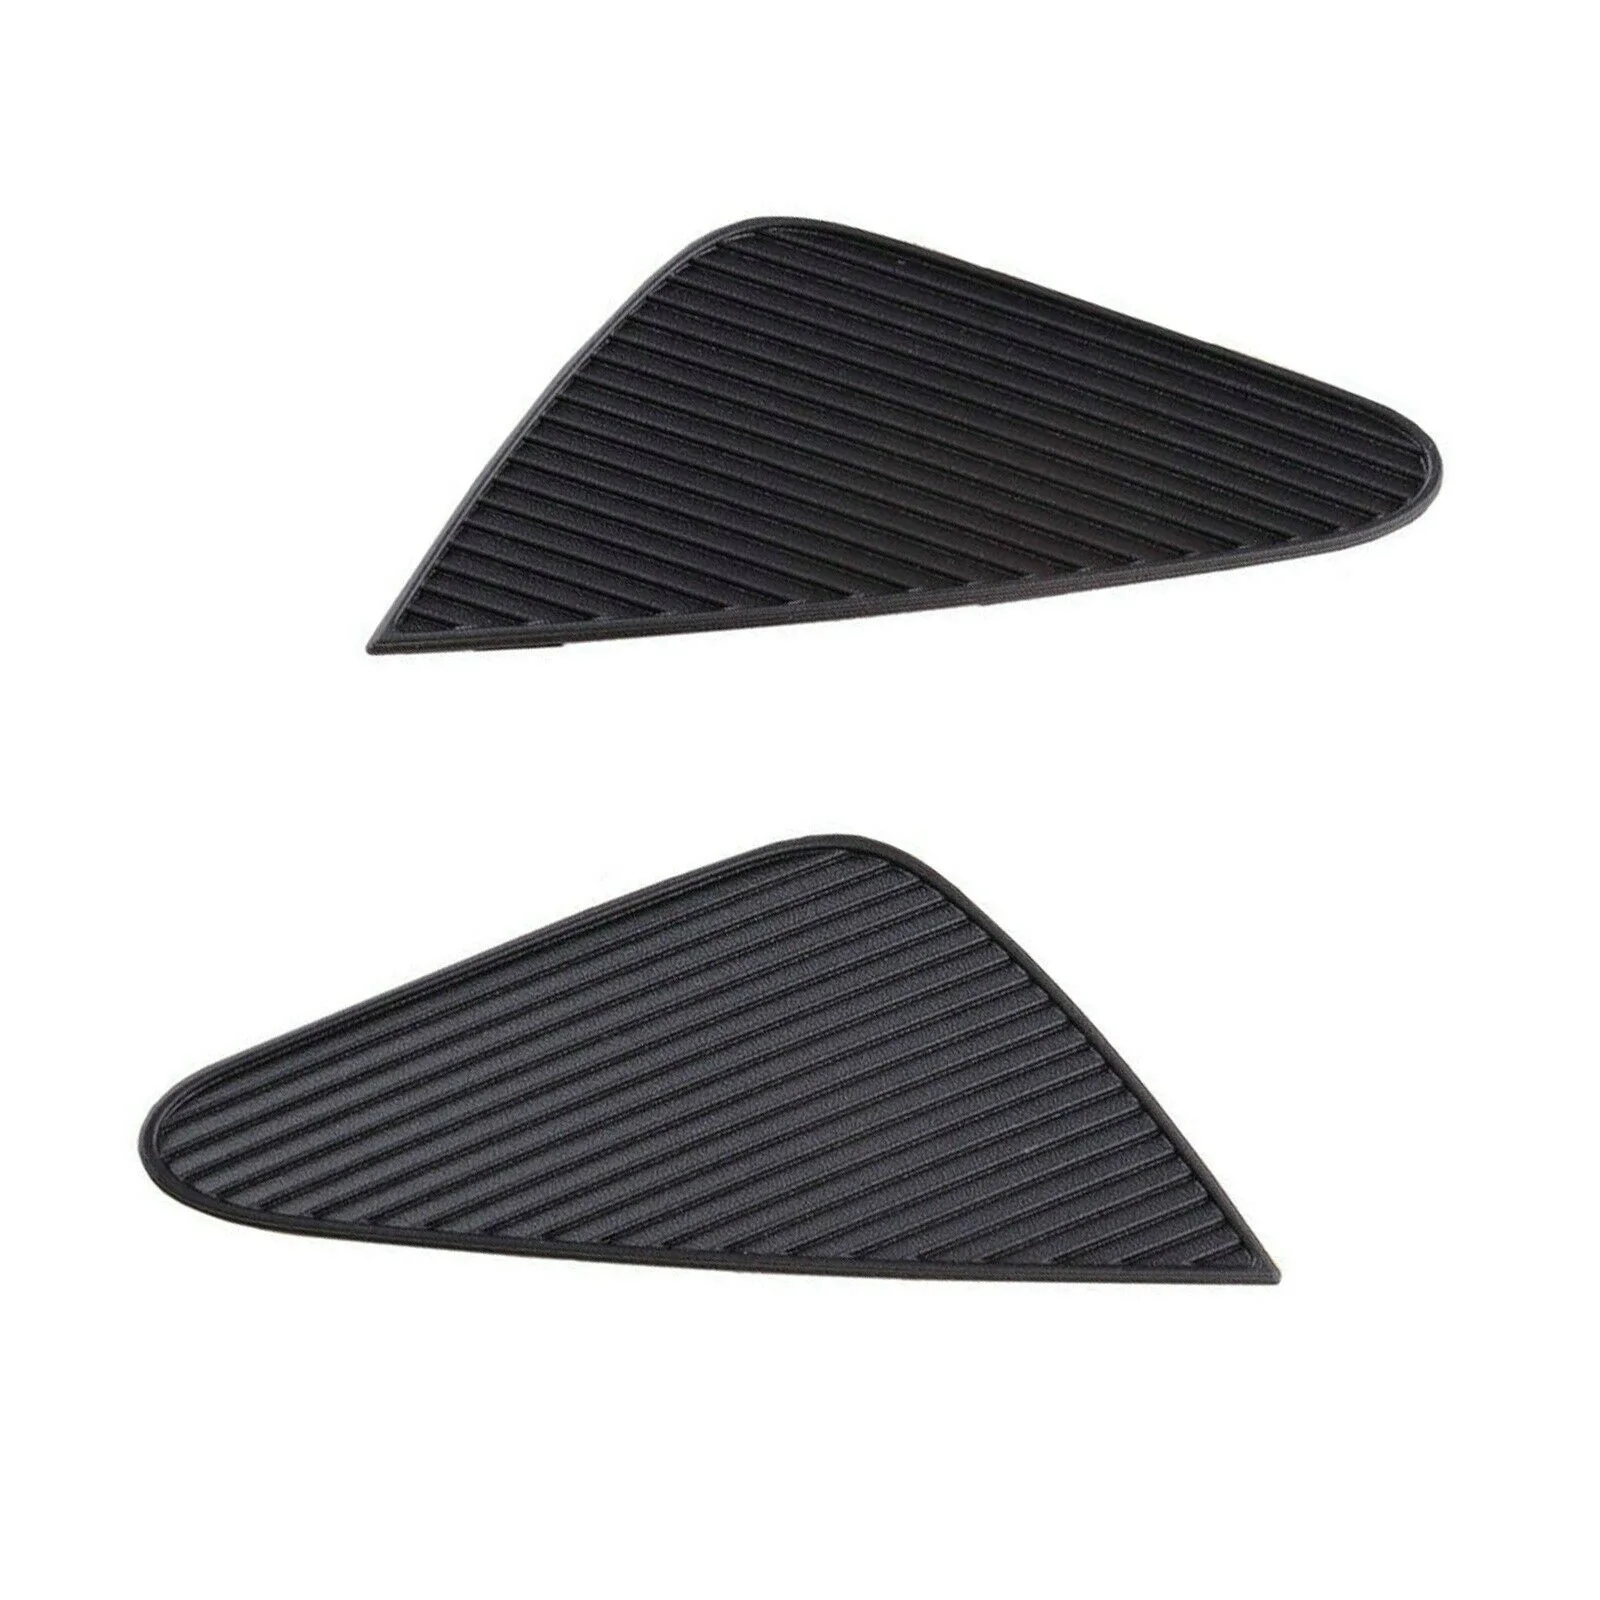 Front Fog Light Lamp Cover Cap Trim for Lexus IS IS250 IS350 2006 2007 2008 2009 5243853010, 5243753010